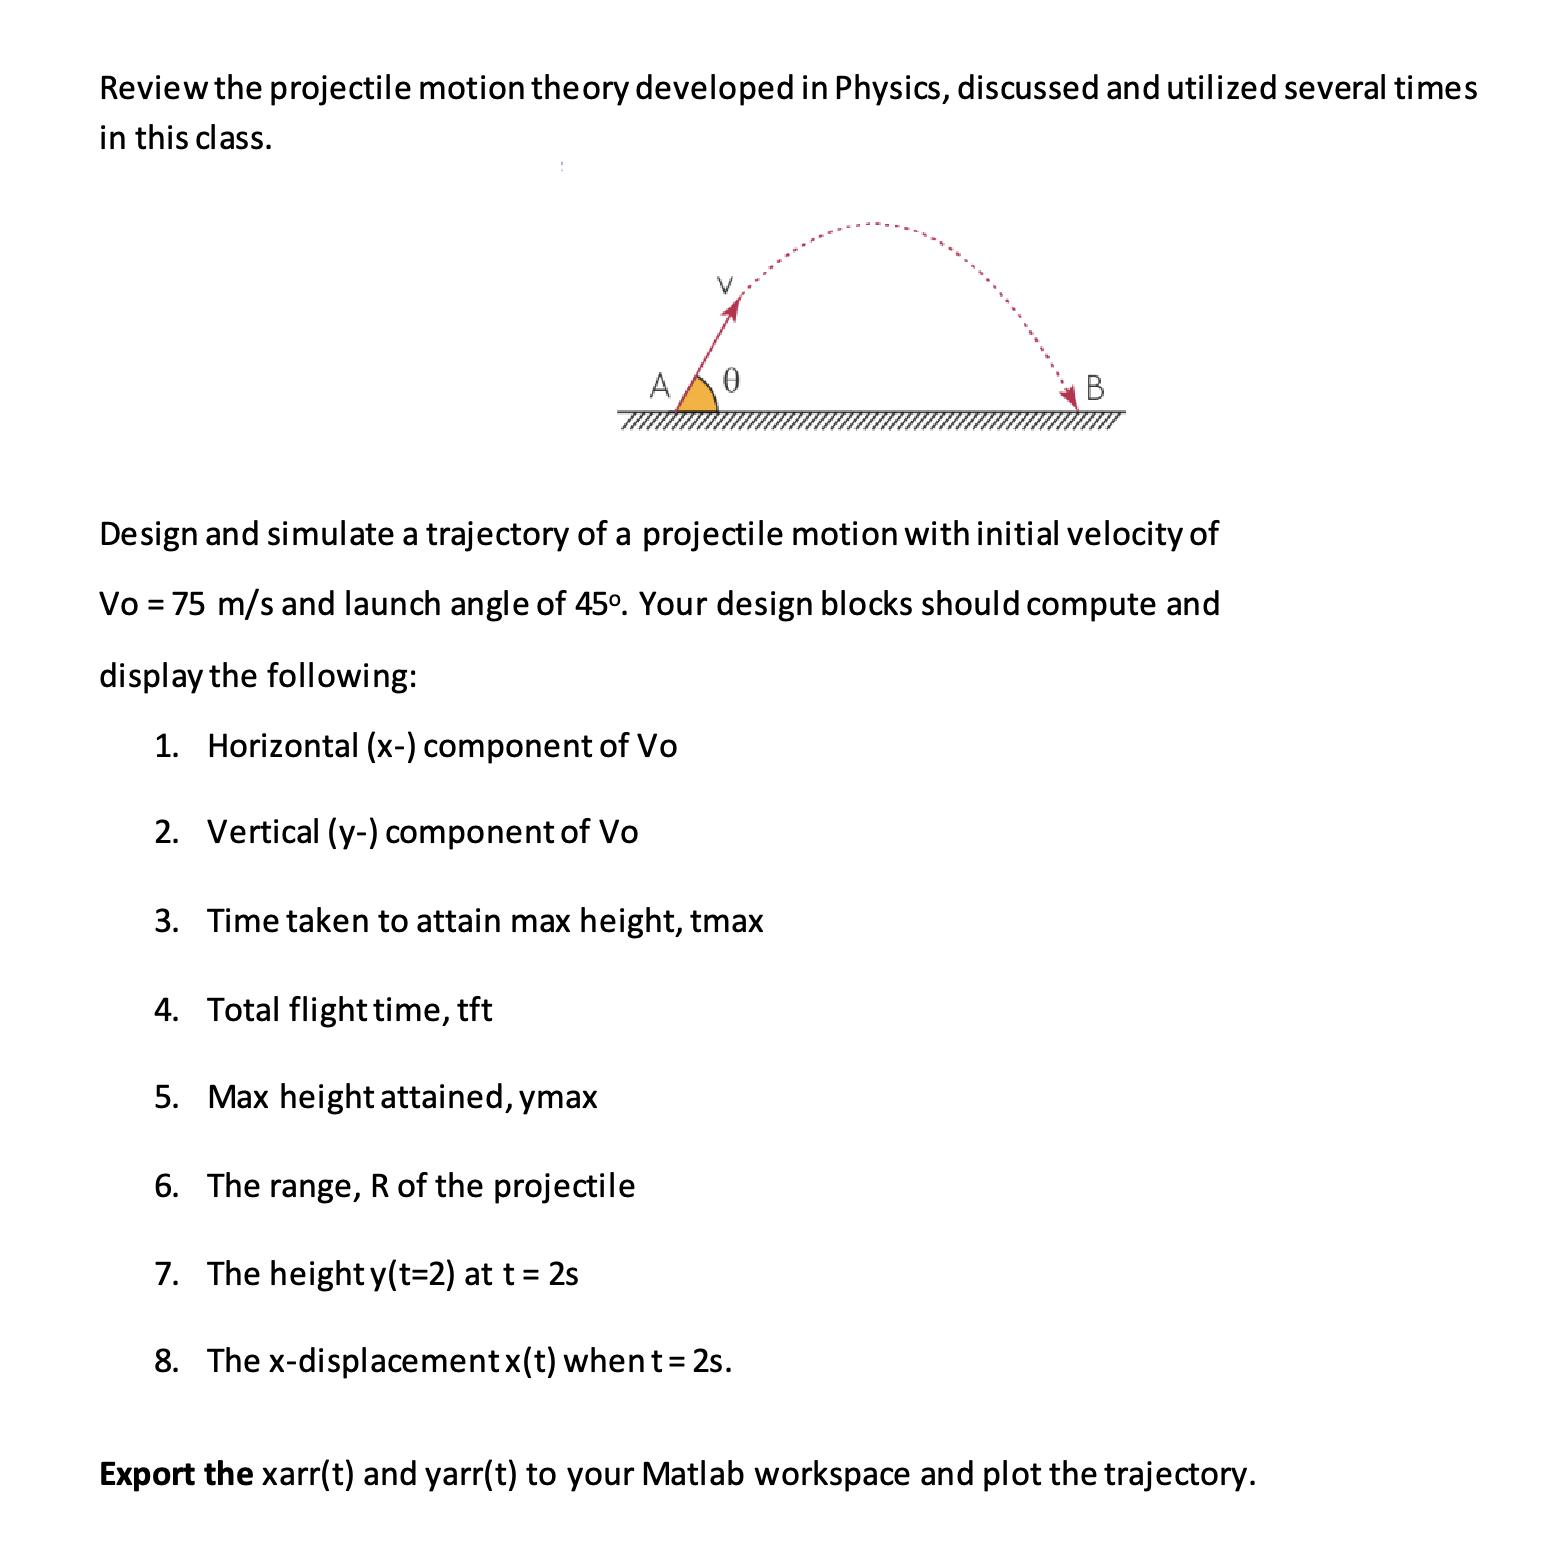 Review the projectile motion theory developed in Physics, discussed and utilized several times in this class.